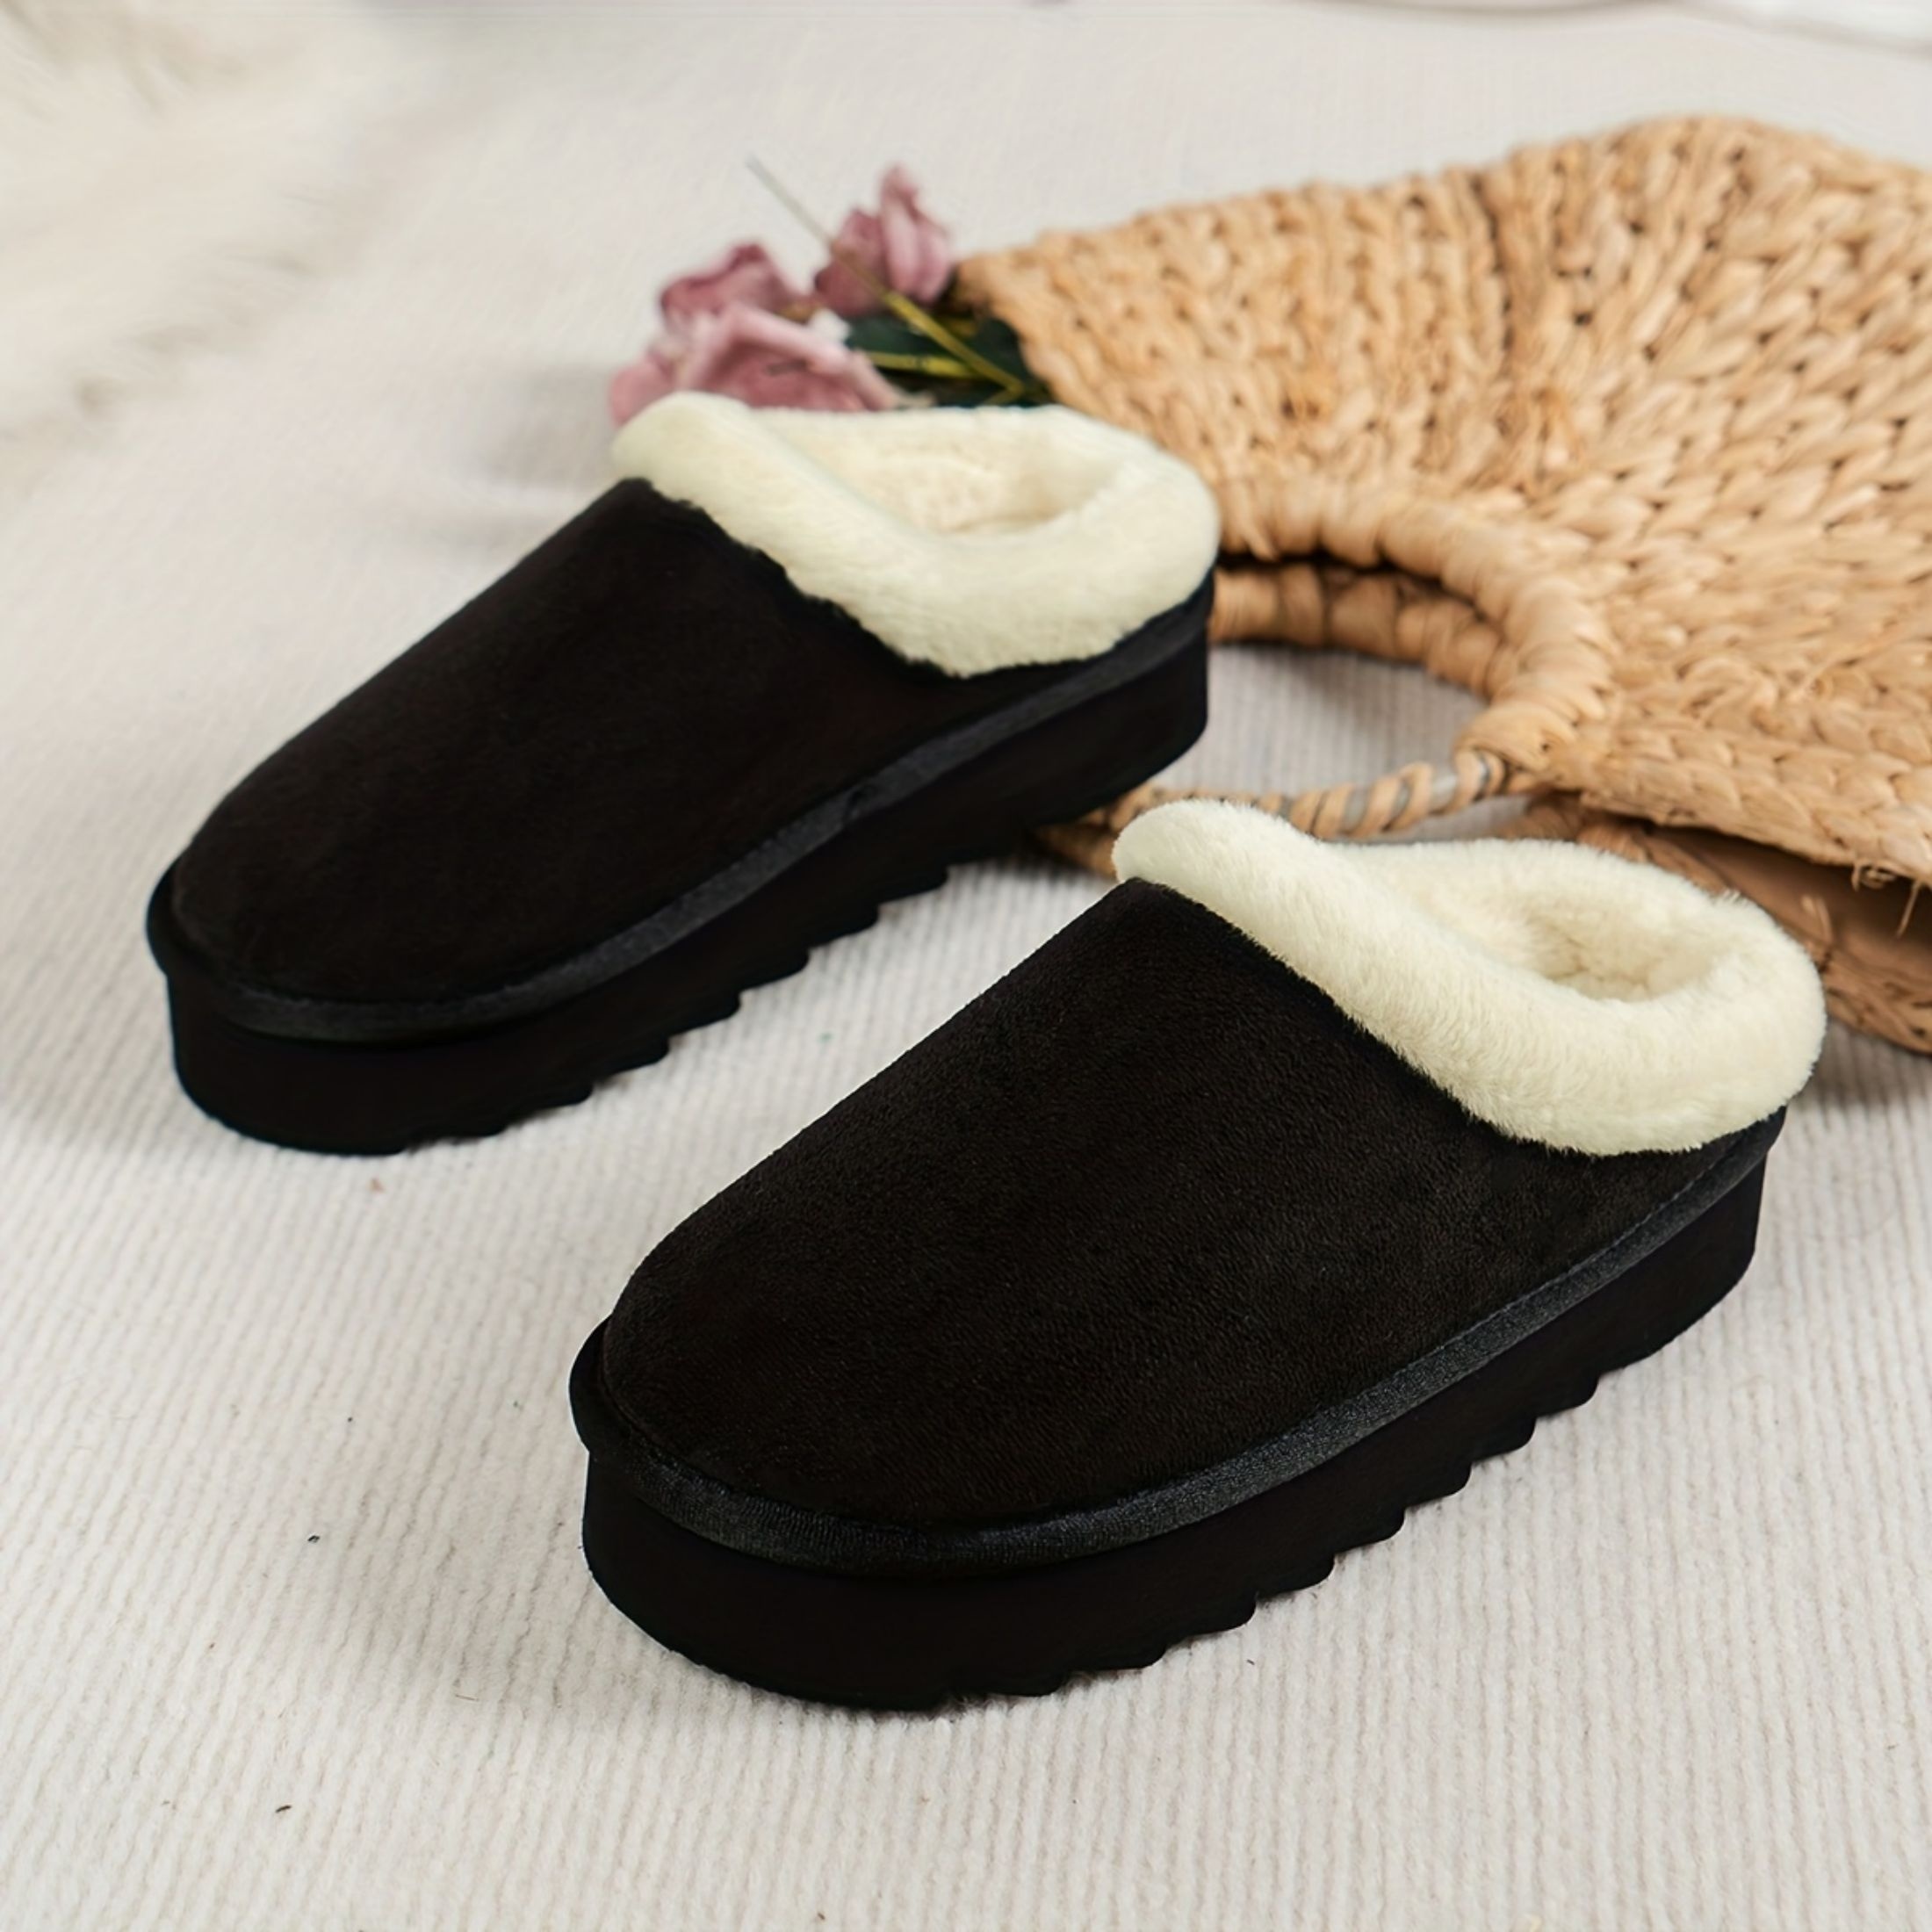 

Women's Fuzzy Platform Slippers, Warm Cozy Indoor & Outdoor Faux Lined Clog Slippers